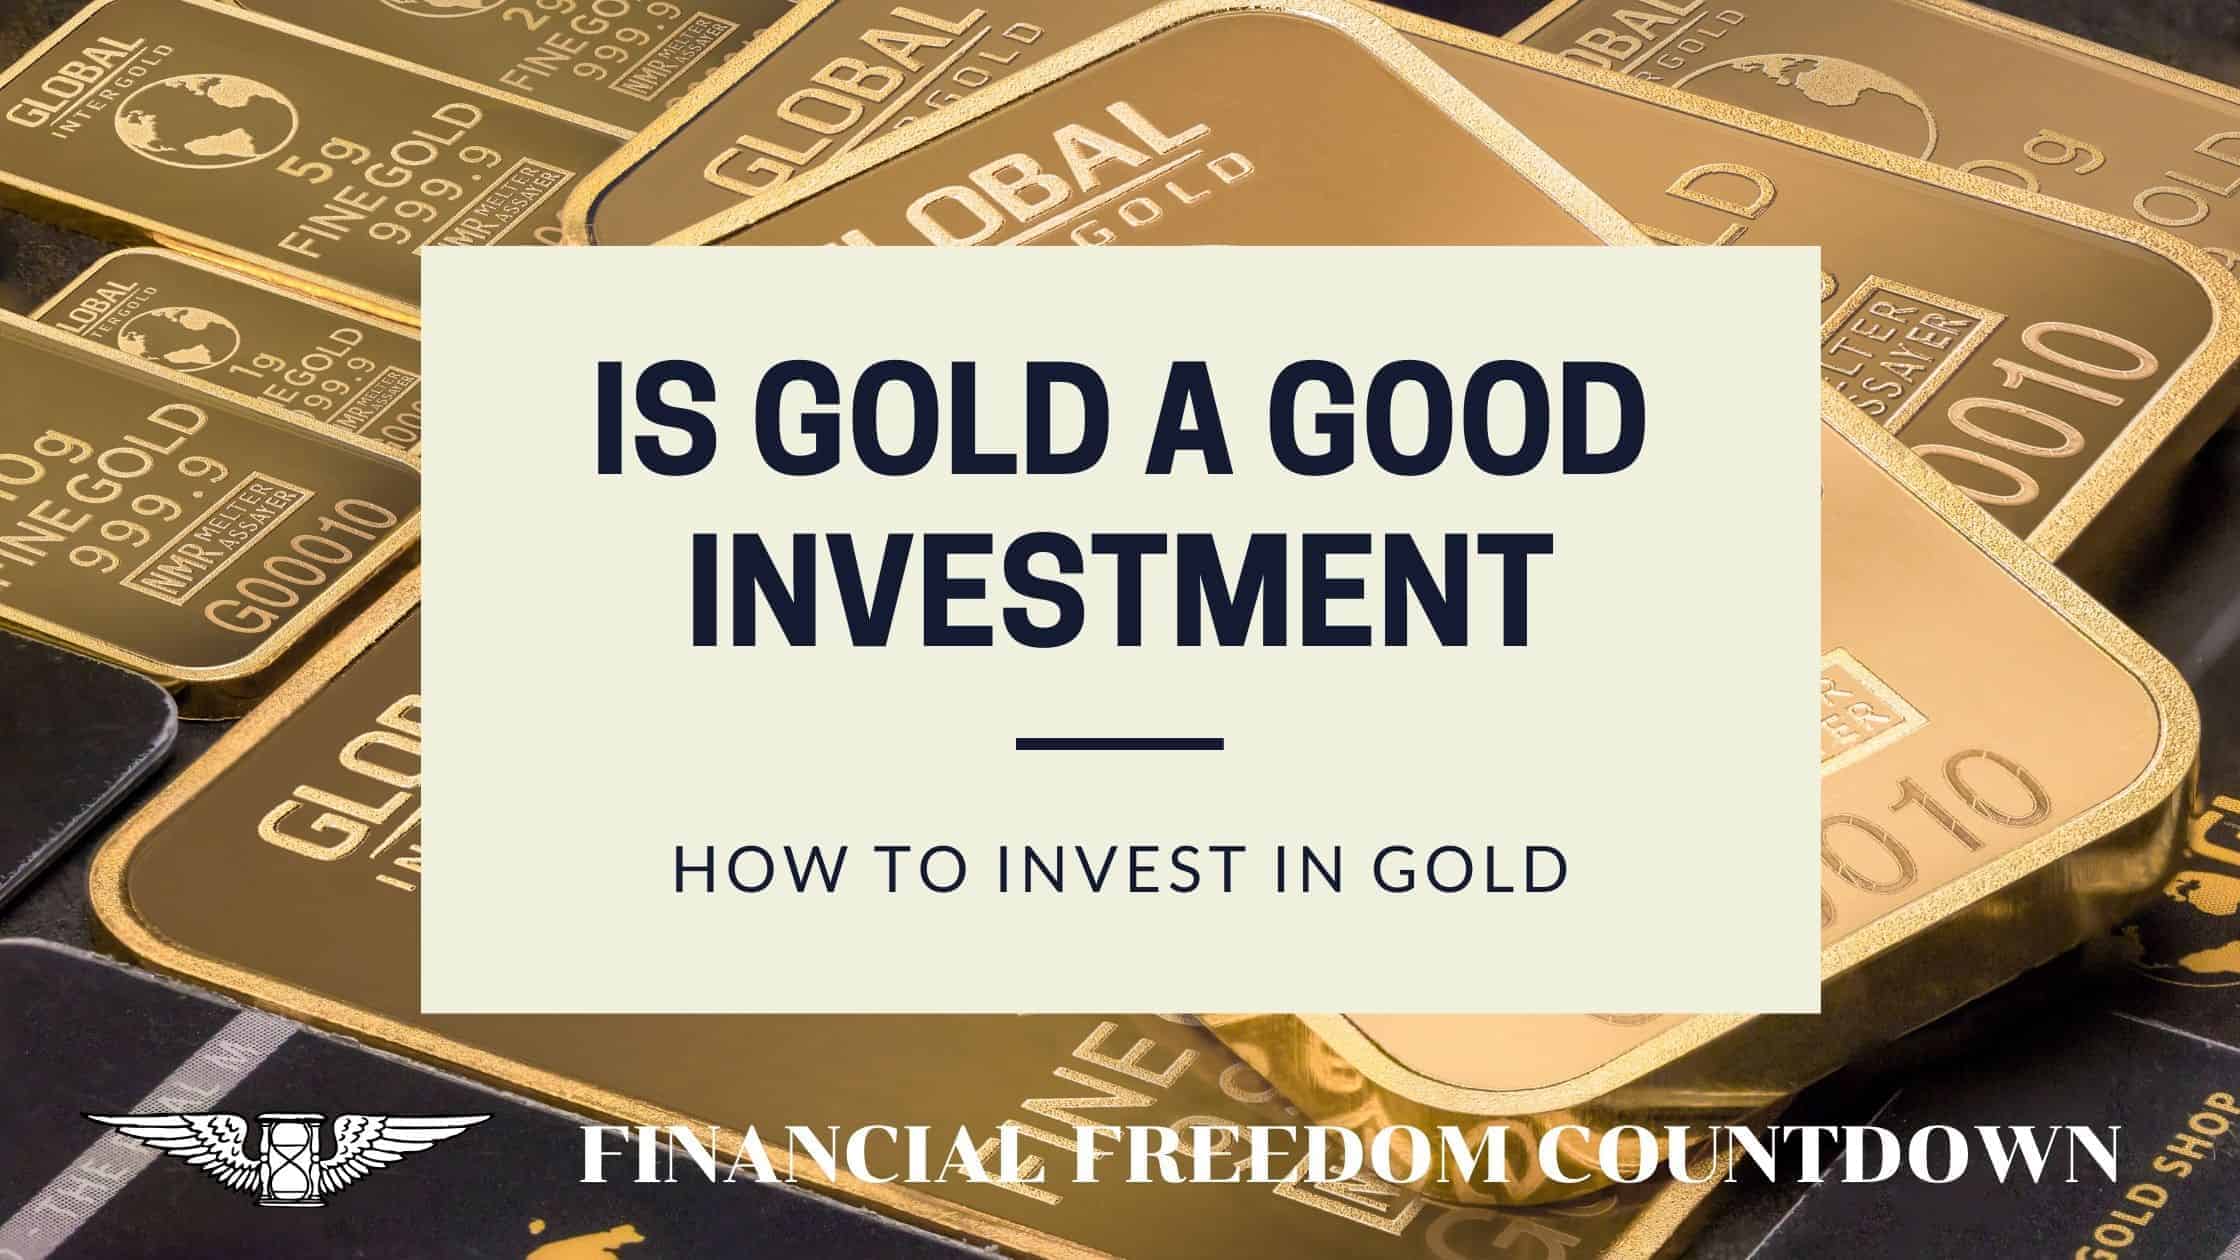 IS GOLD A GOOD INVESTMENT How To Invest In Gold